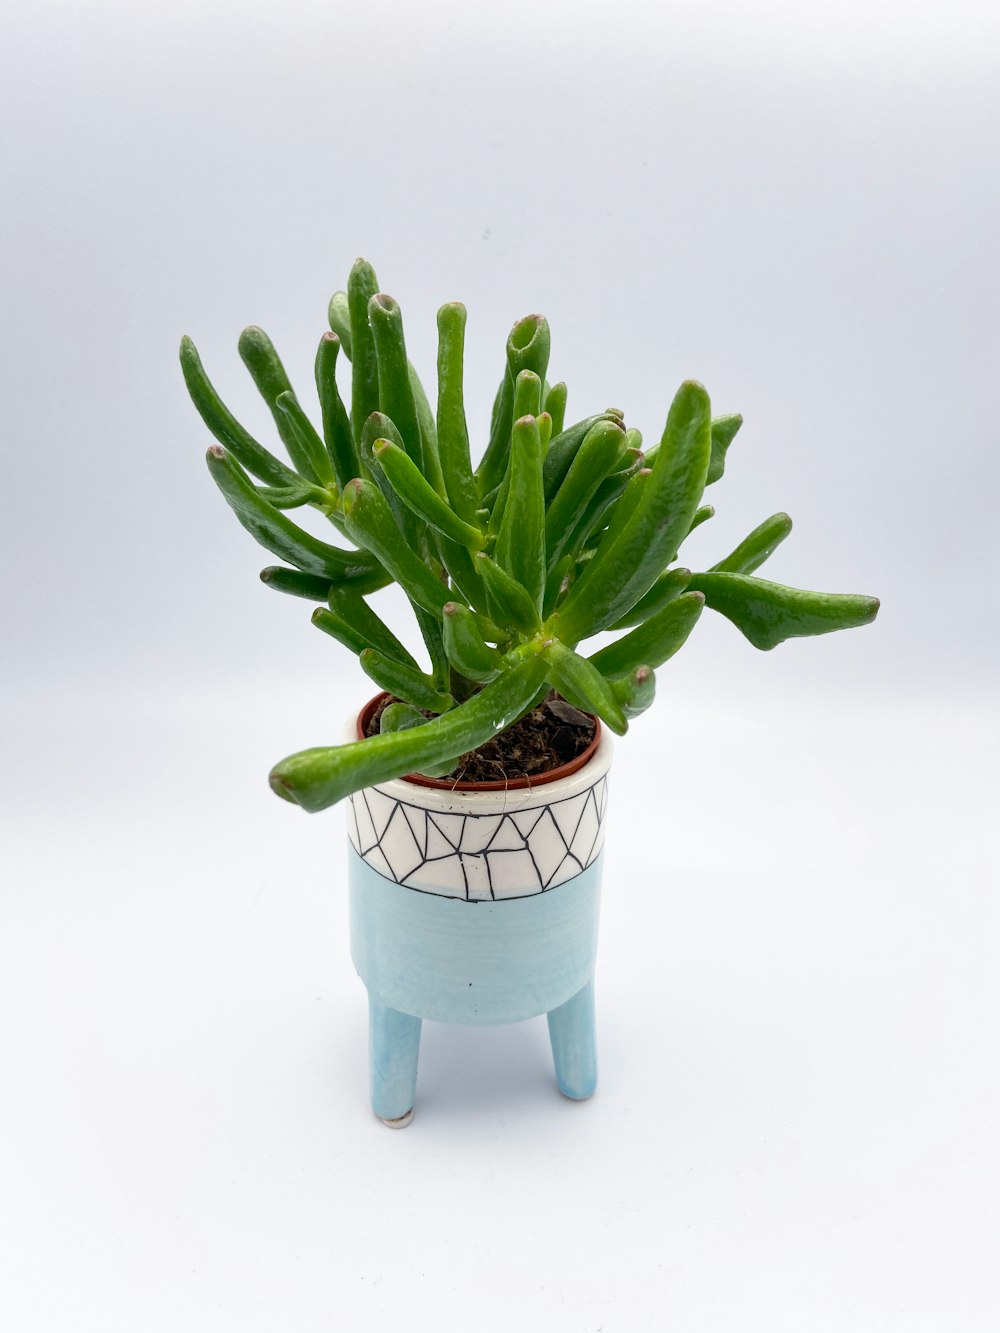 a potted plant with a small plant in it